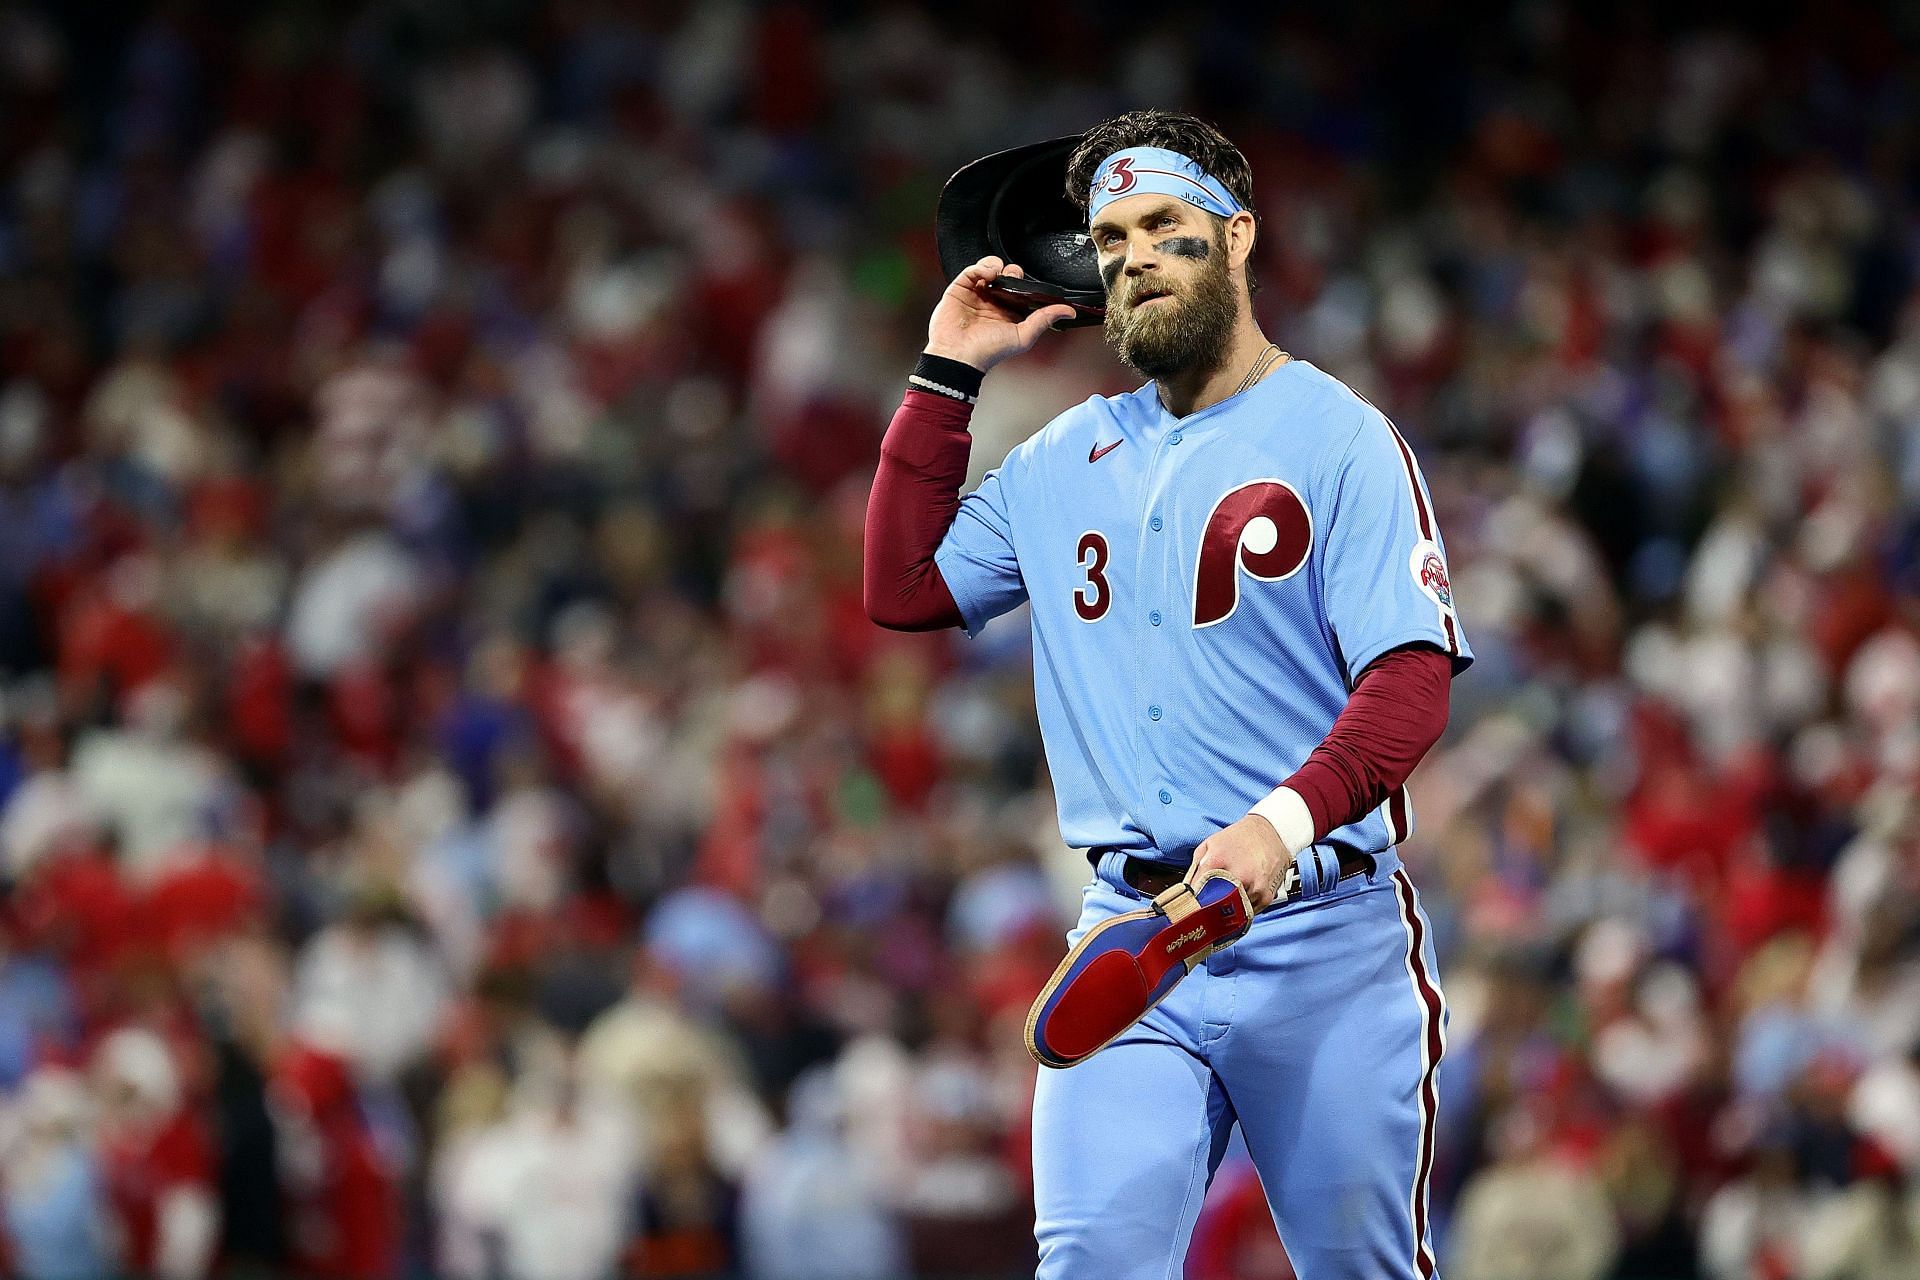 Bryce Harper Contract: What is Bryce Harper's salary for the 2023 season?